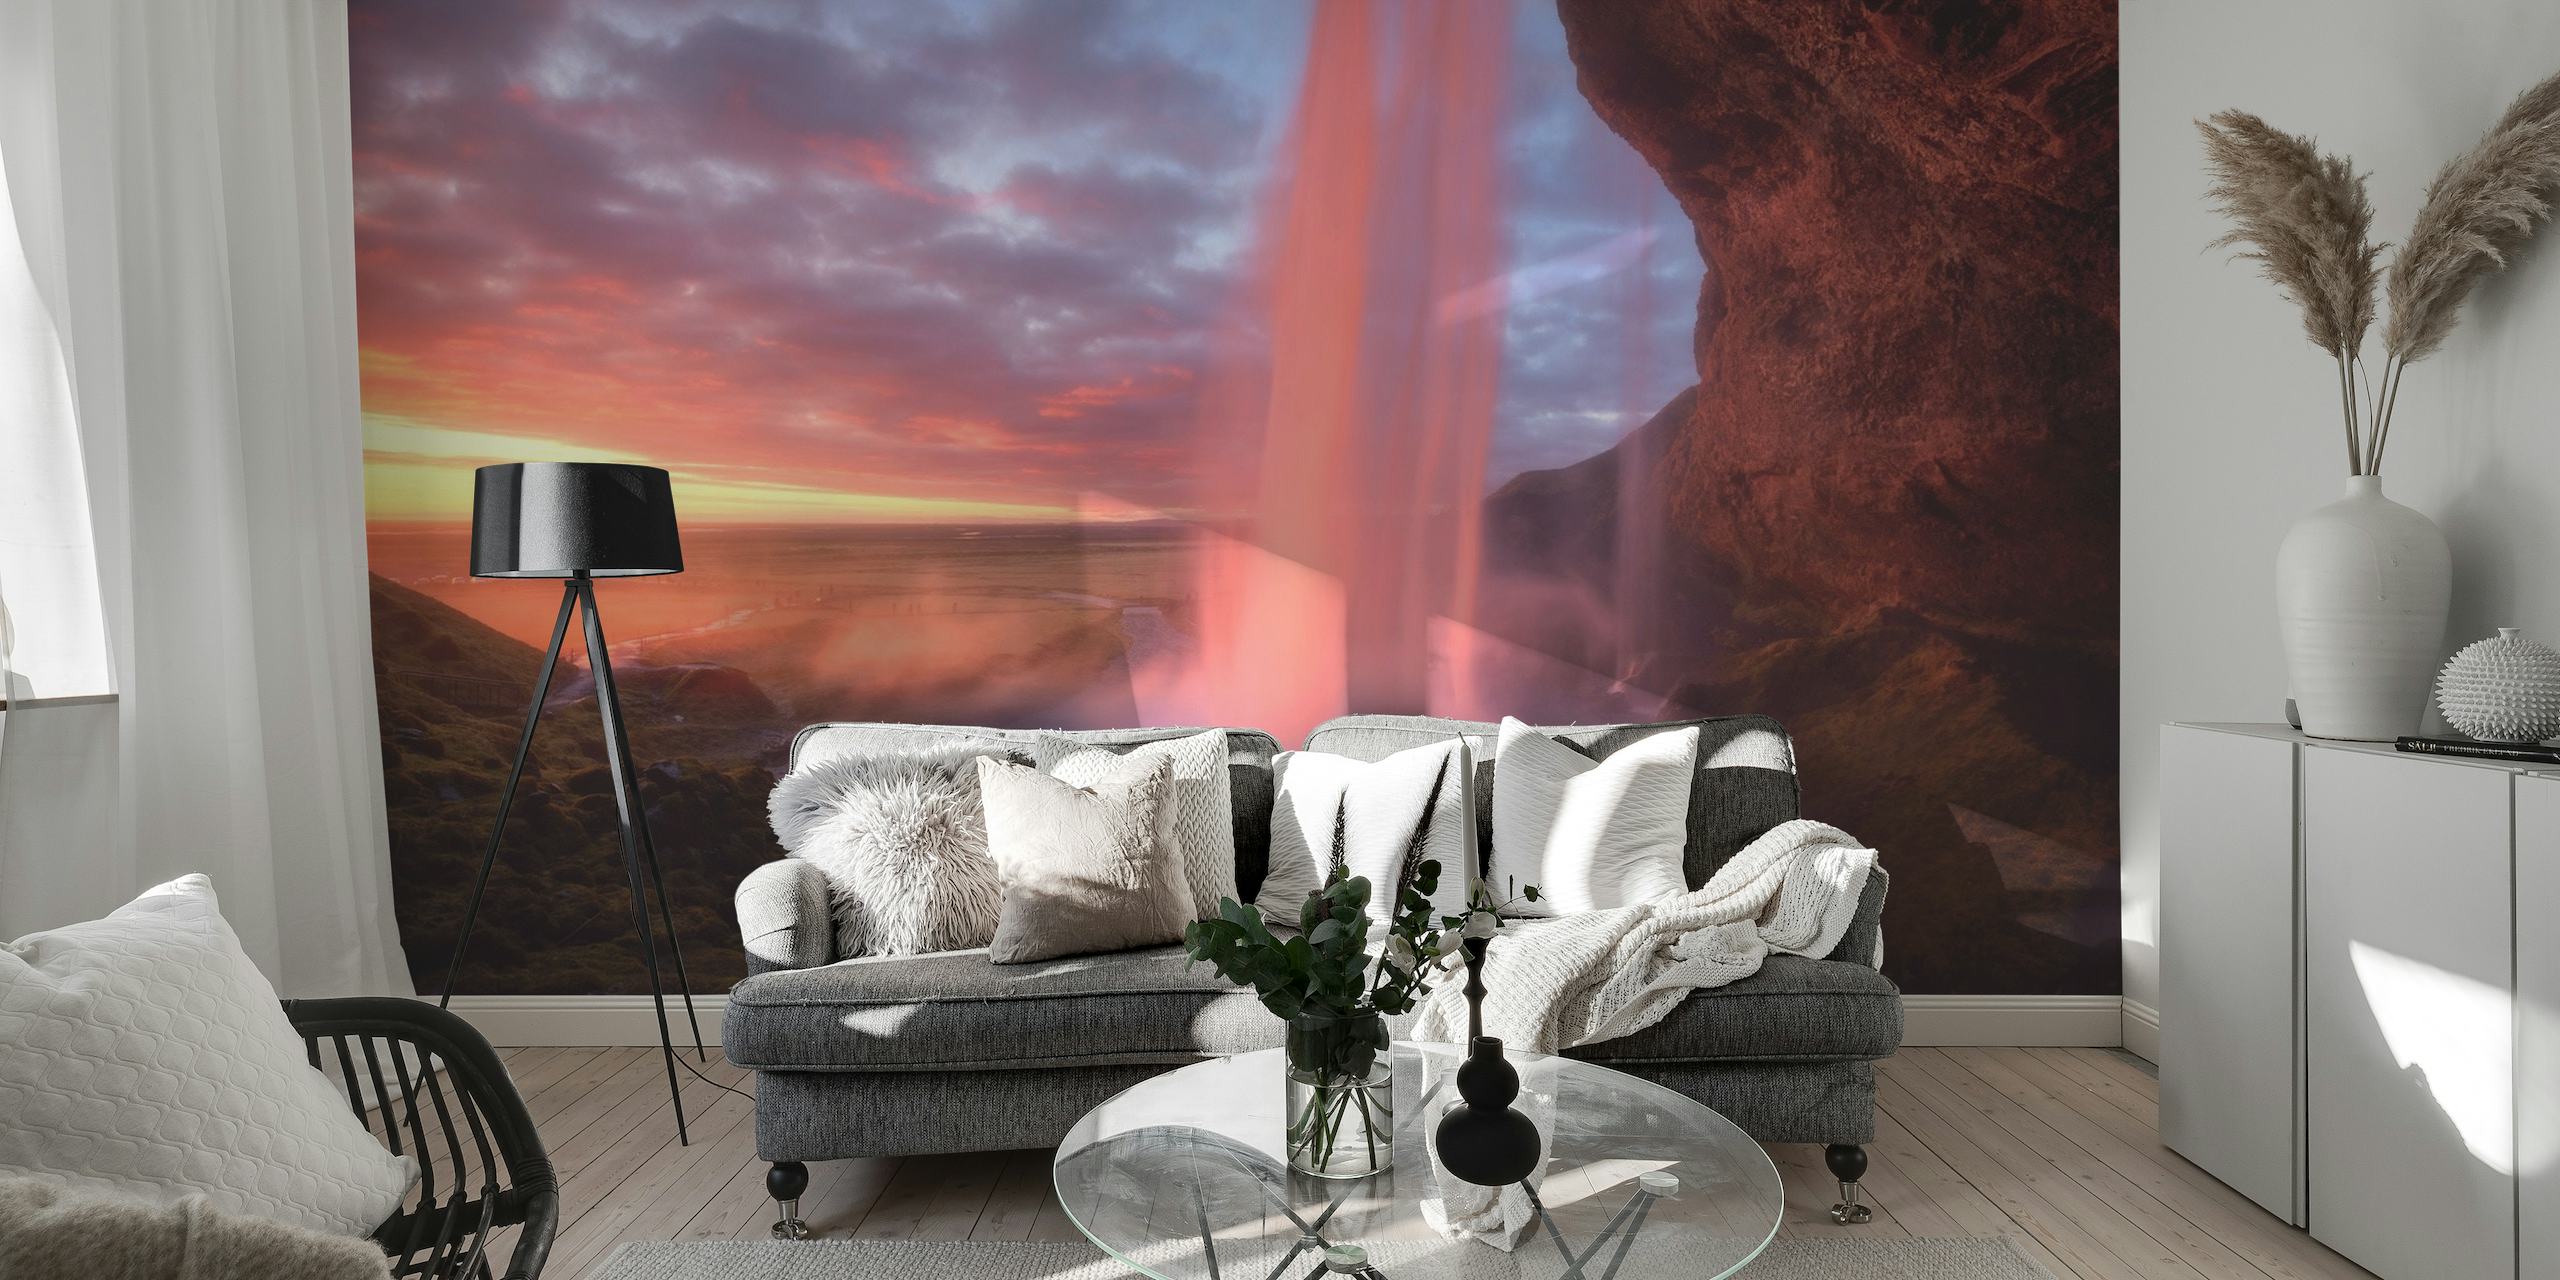 A waterfall wall mural with sunset colors, named 'The Burning Falls'